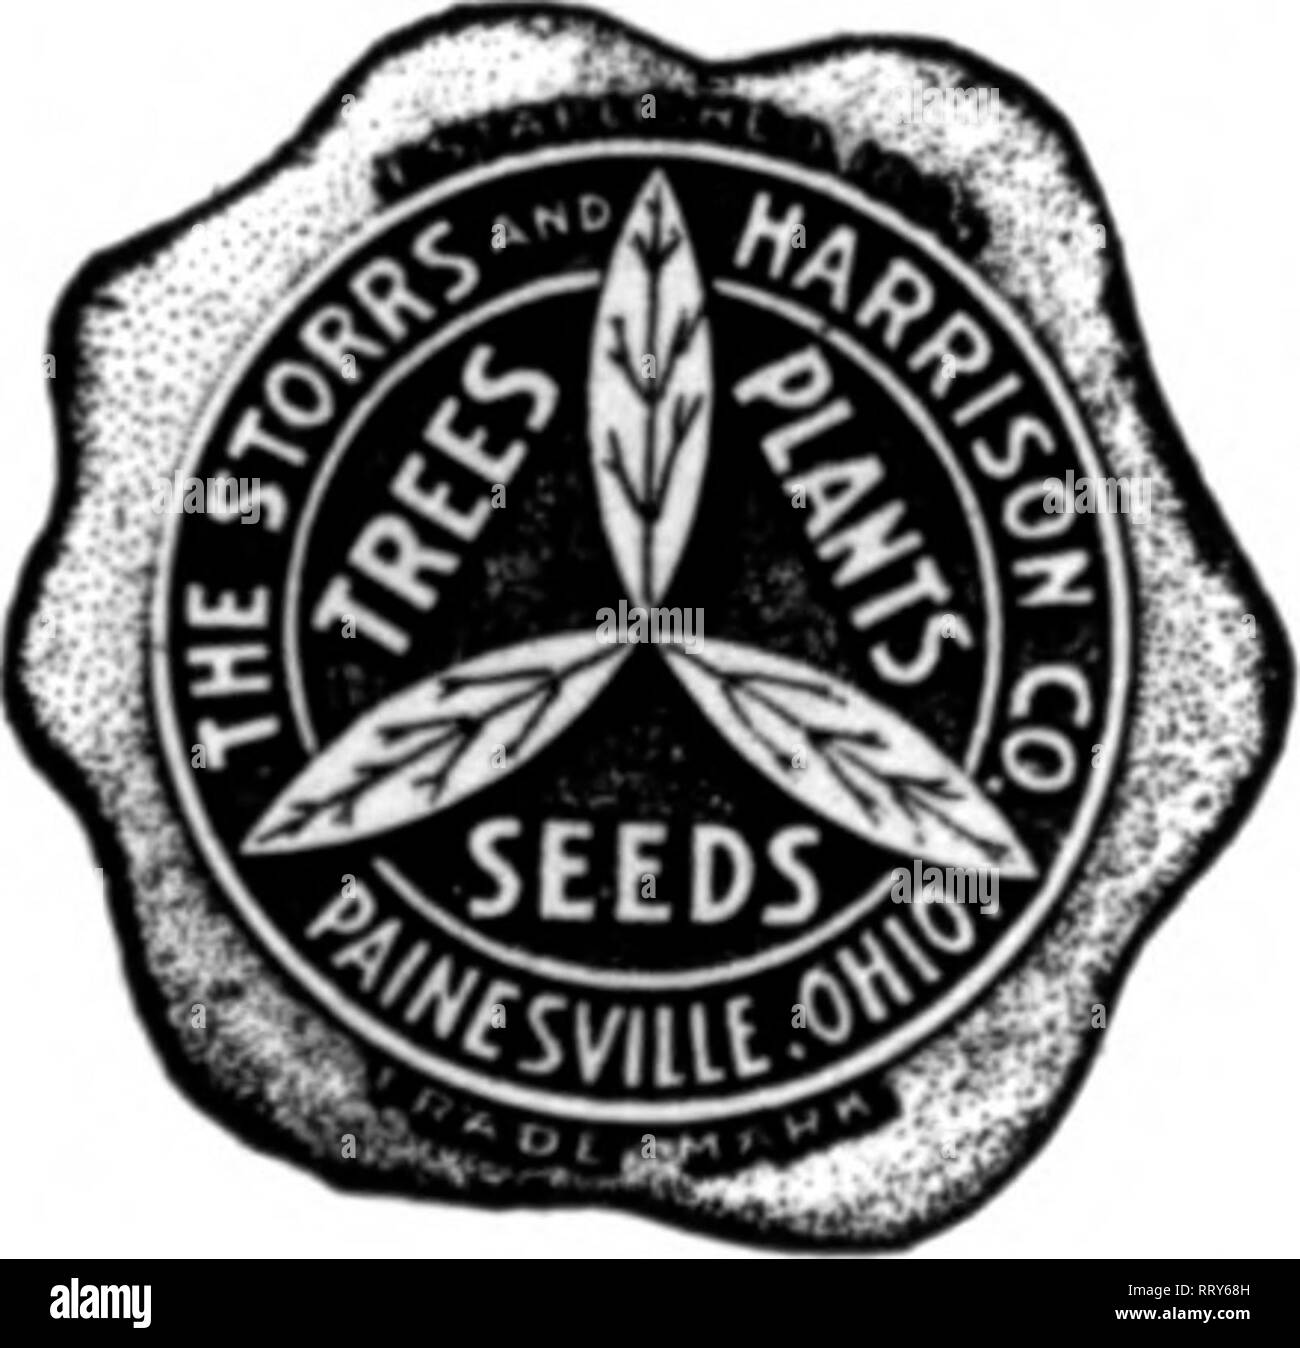 . Florists' review [microform]. Floriculture. &quot;Supeili QaaUty&quot; Seeds for Florists THE STORRS &amp; HARRISON CO.'S SUPERB MIXTURE OF Giant Pansy Seed is the very best that Pansy Specialists can produce. Carefully mixed and blended. Positively no better seed can be had at any price. Trade Pkt, SOc; ^-oz., $1.28; oz., $4.00 All other strains and named varieties of Pansies. See our &quot;Trade List&quot; for prices. ^^||k|^QAQ|m **SnPERB QUALITY,*' Mixed Colors, winEiCJ4lflM Trade packet, $1.00 BELLIS PERENNIS (English Daisy) Longfellow (red), Snowball (white), tr. pkt., 36c; Mixed Color Stock Photo